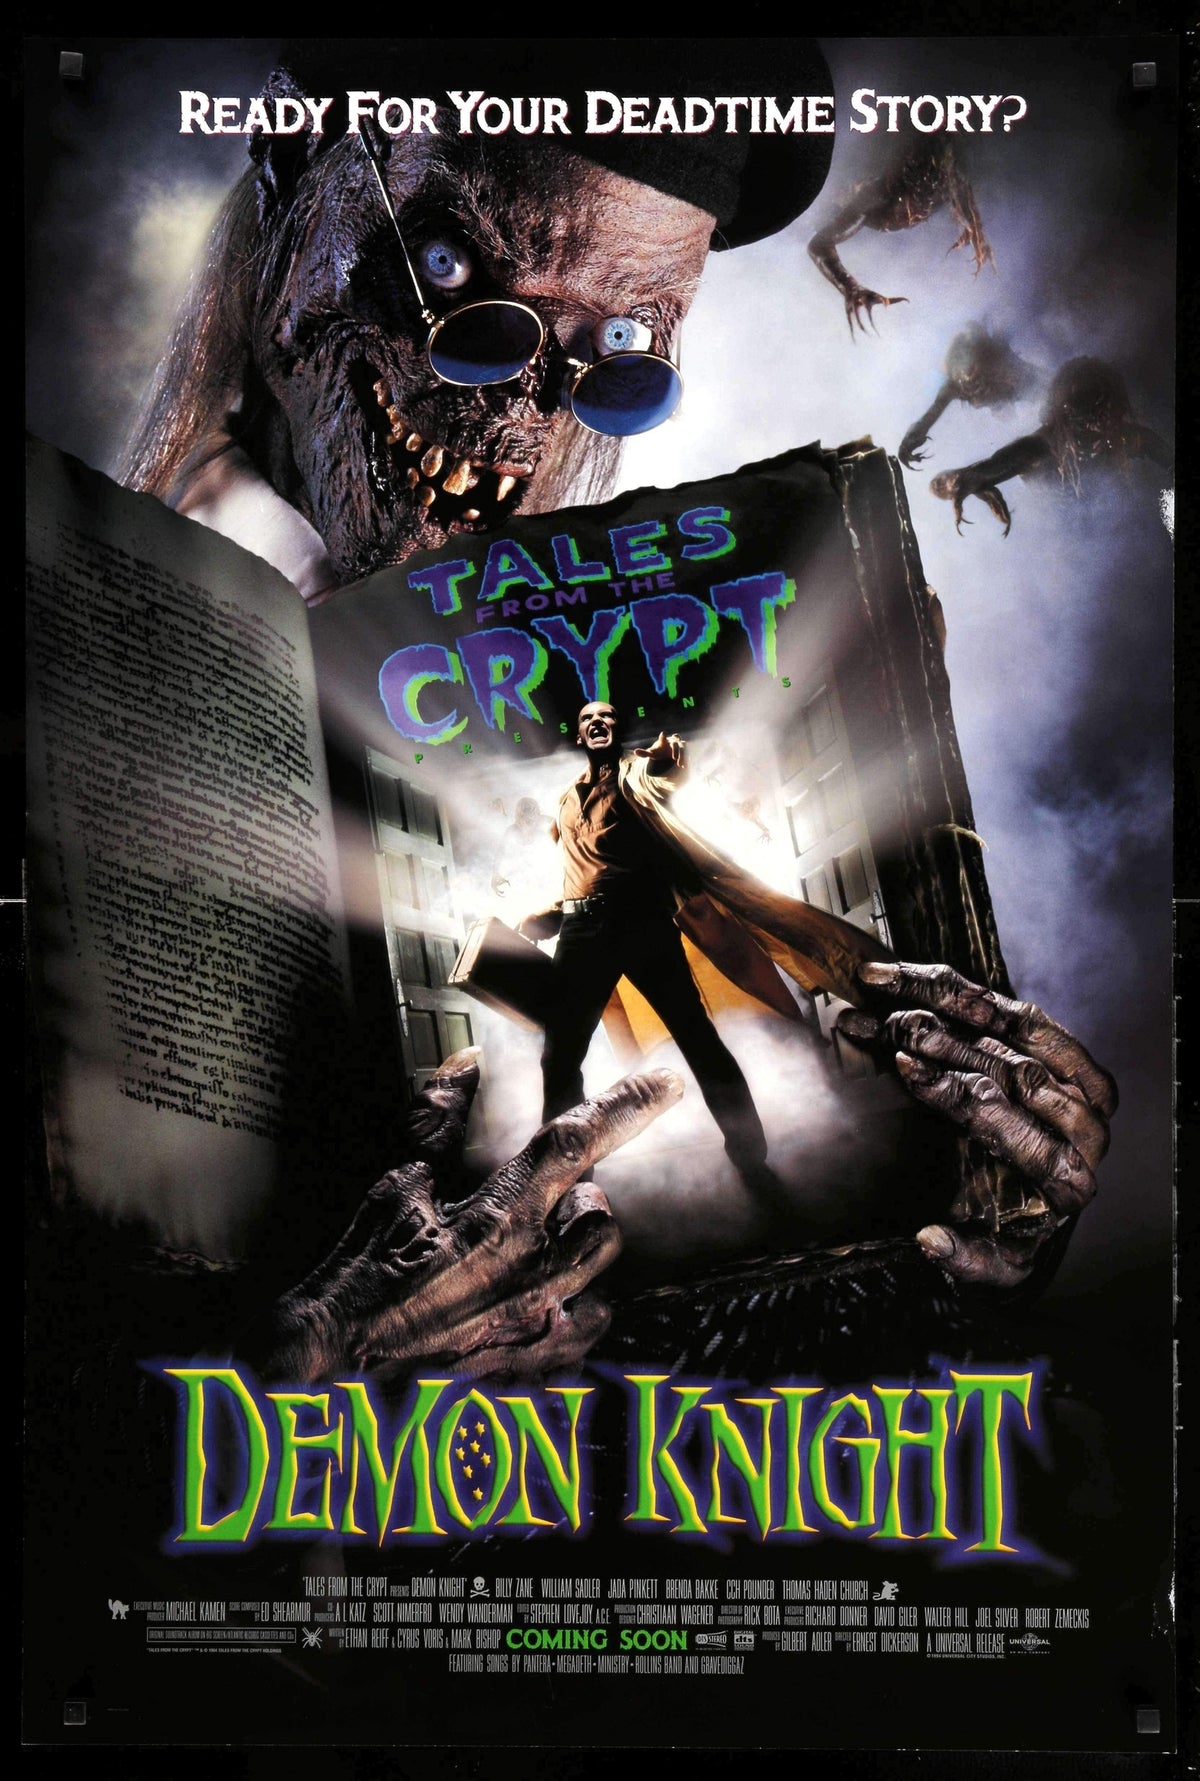 Tales From the Crypt: Demon Knight (1995) original movie poster for sale at Original Film Art